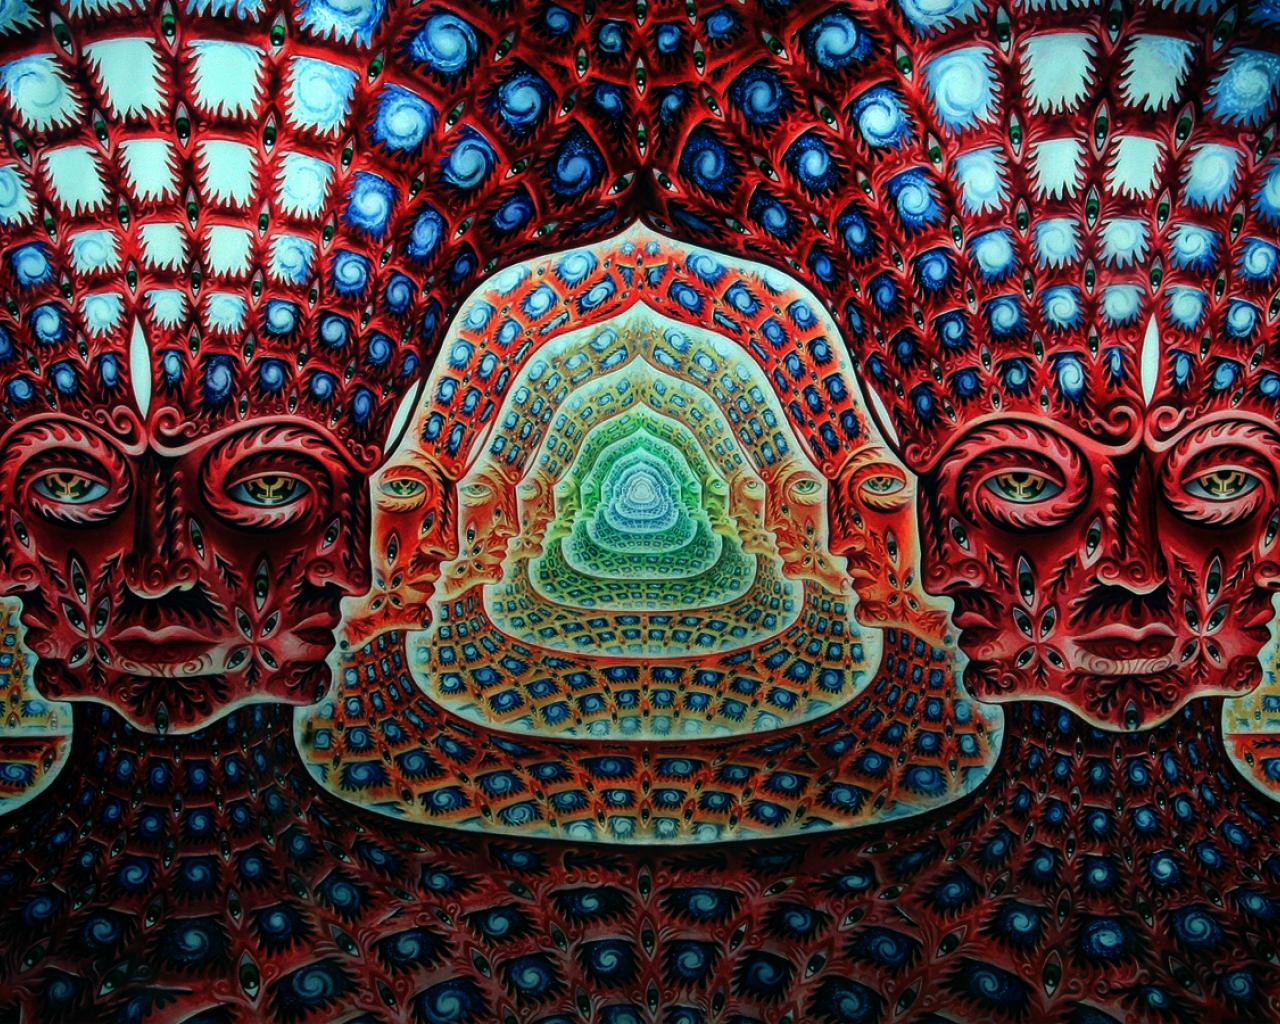 Tool alex grey wallpaper - (#181443) - High Quality and Resolution ...